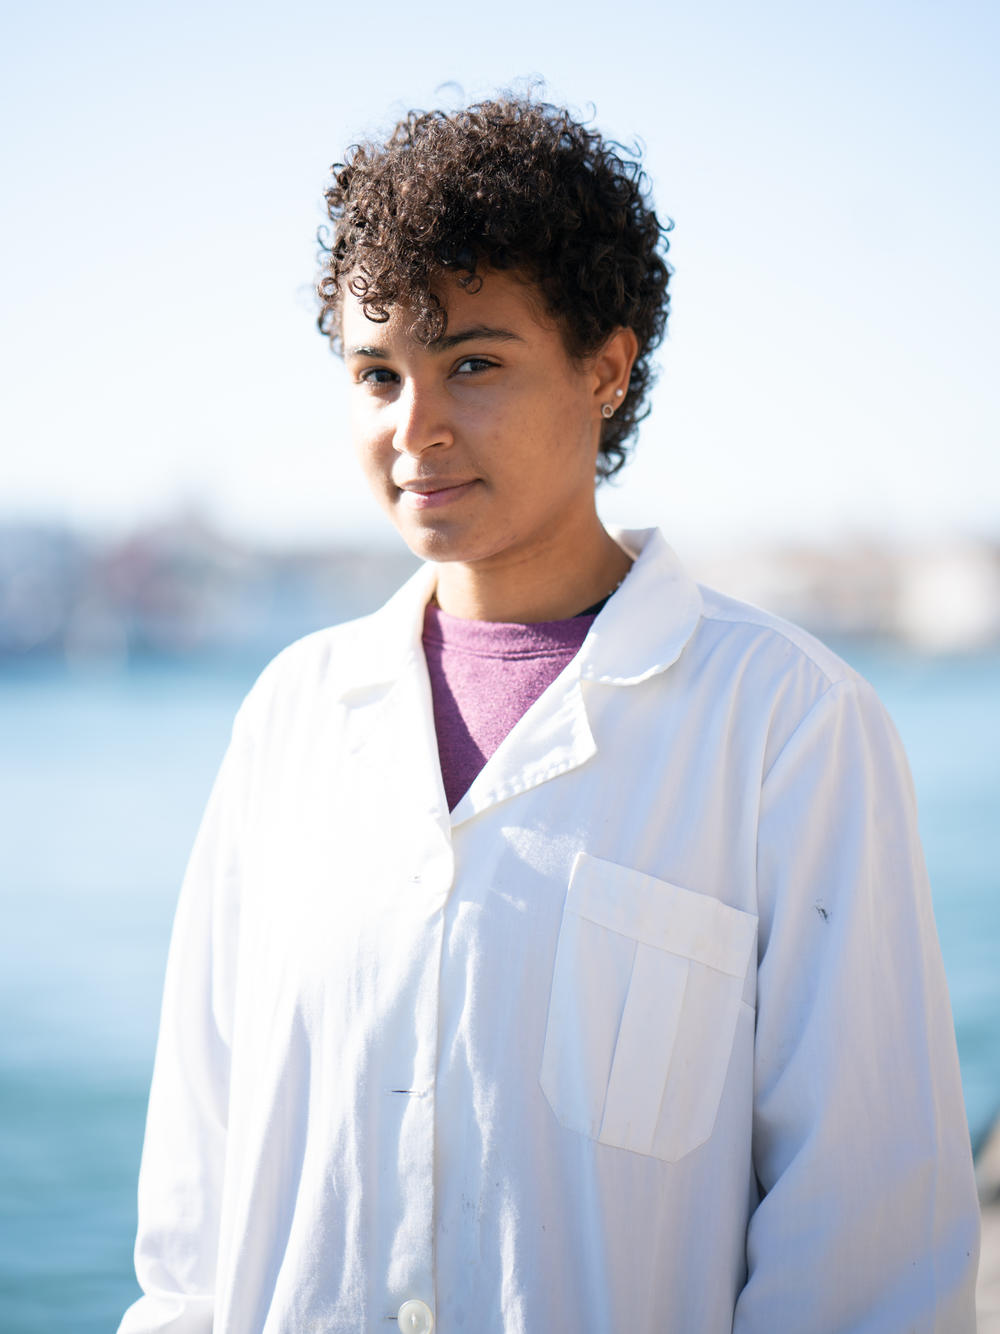 Manon Museux, 22, works as an intern with the quality control of the fish coming into the port in Peniche, Portugal.